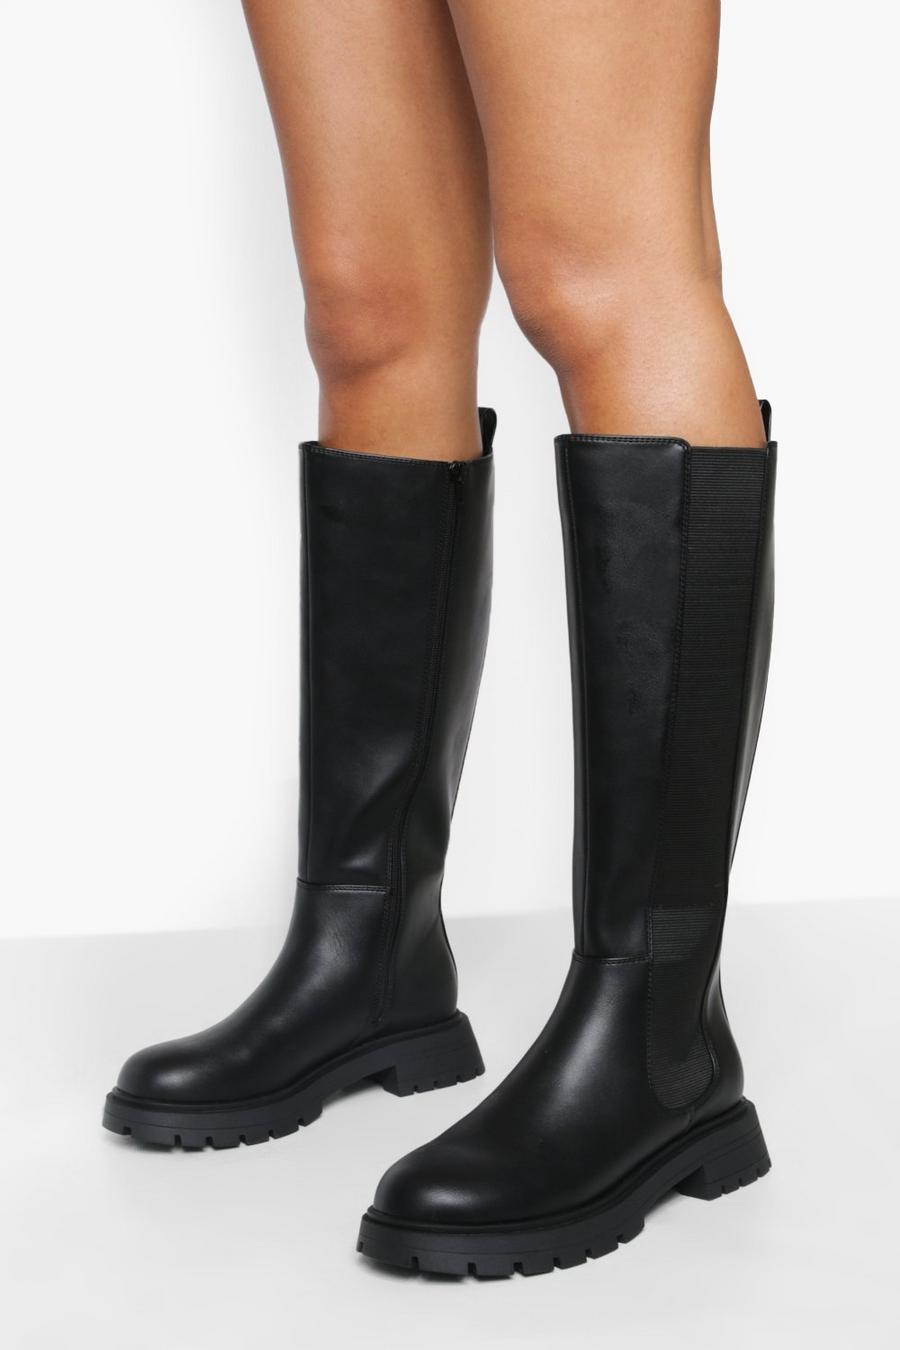 Monki Boots for Women  Black Friday Sale & Deals up to 80% off